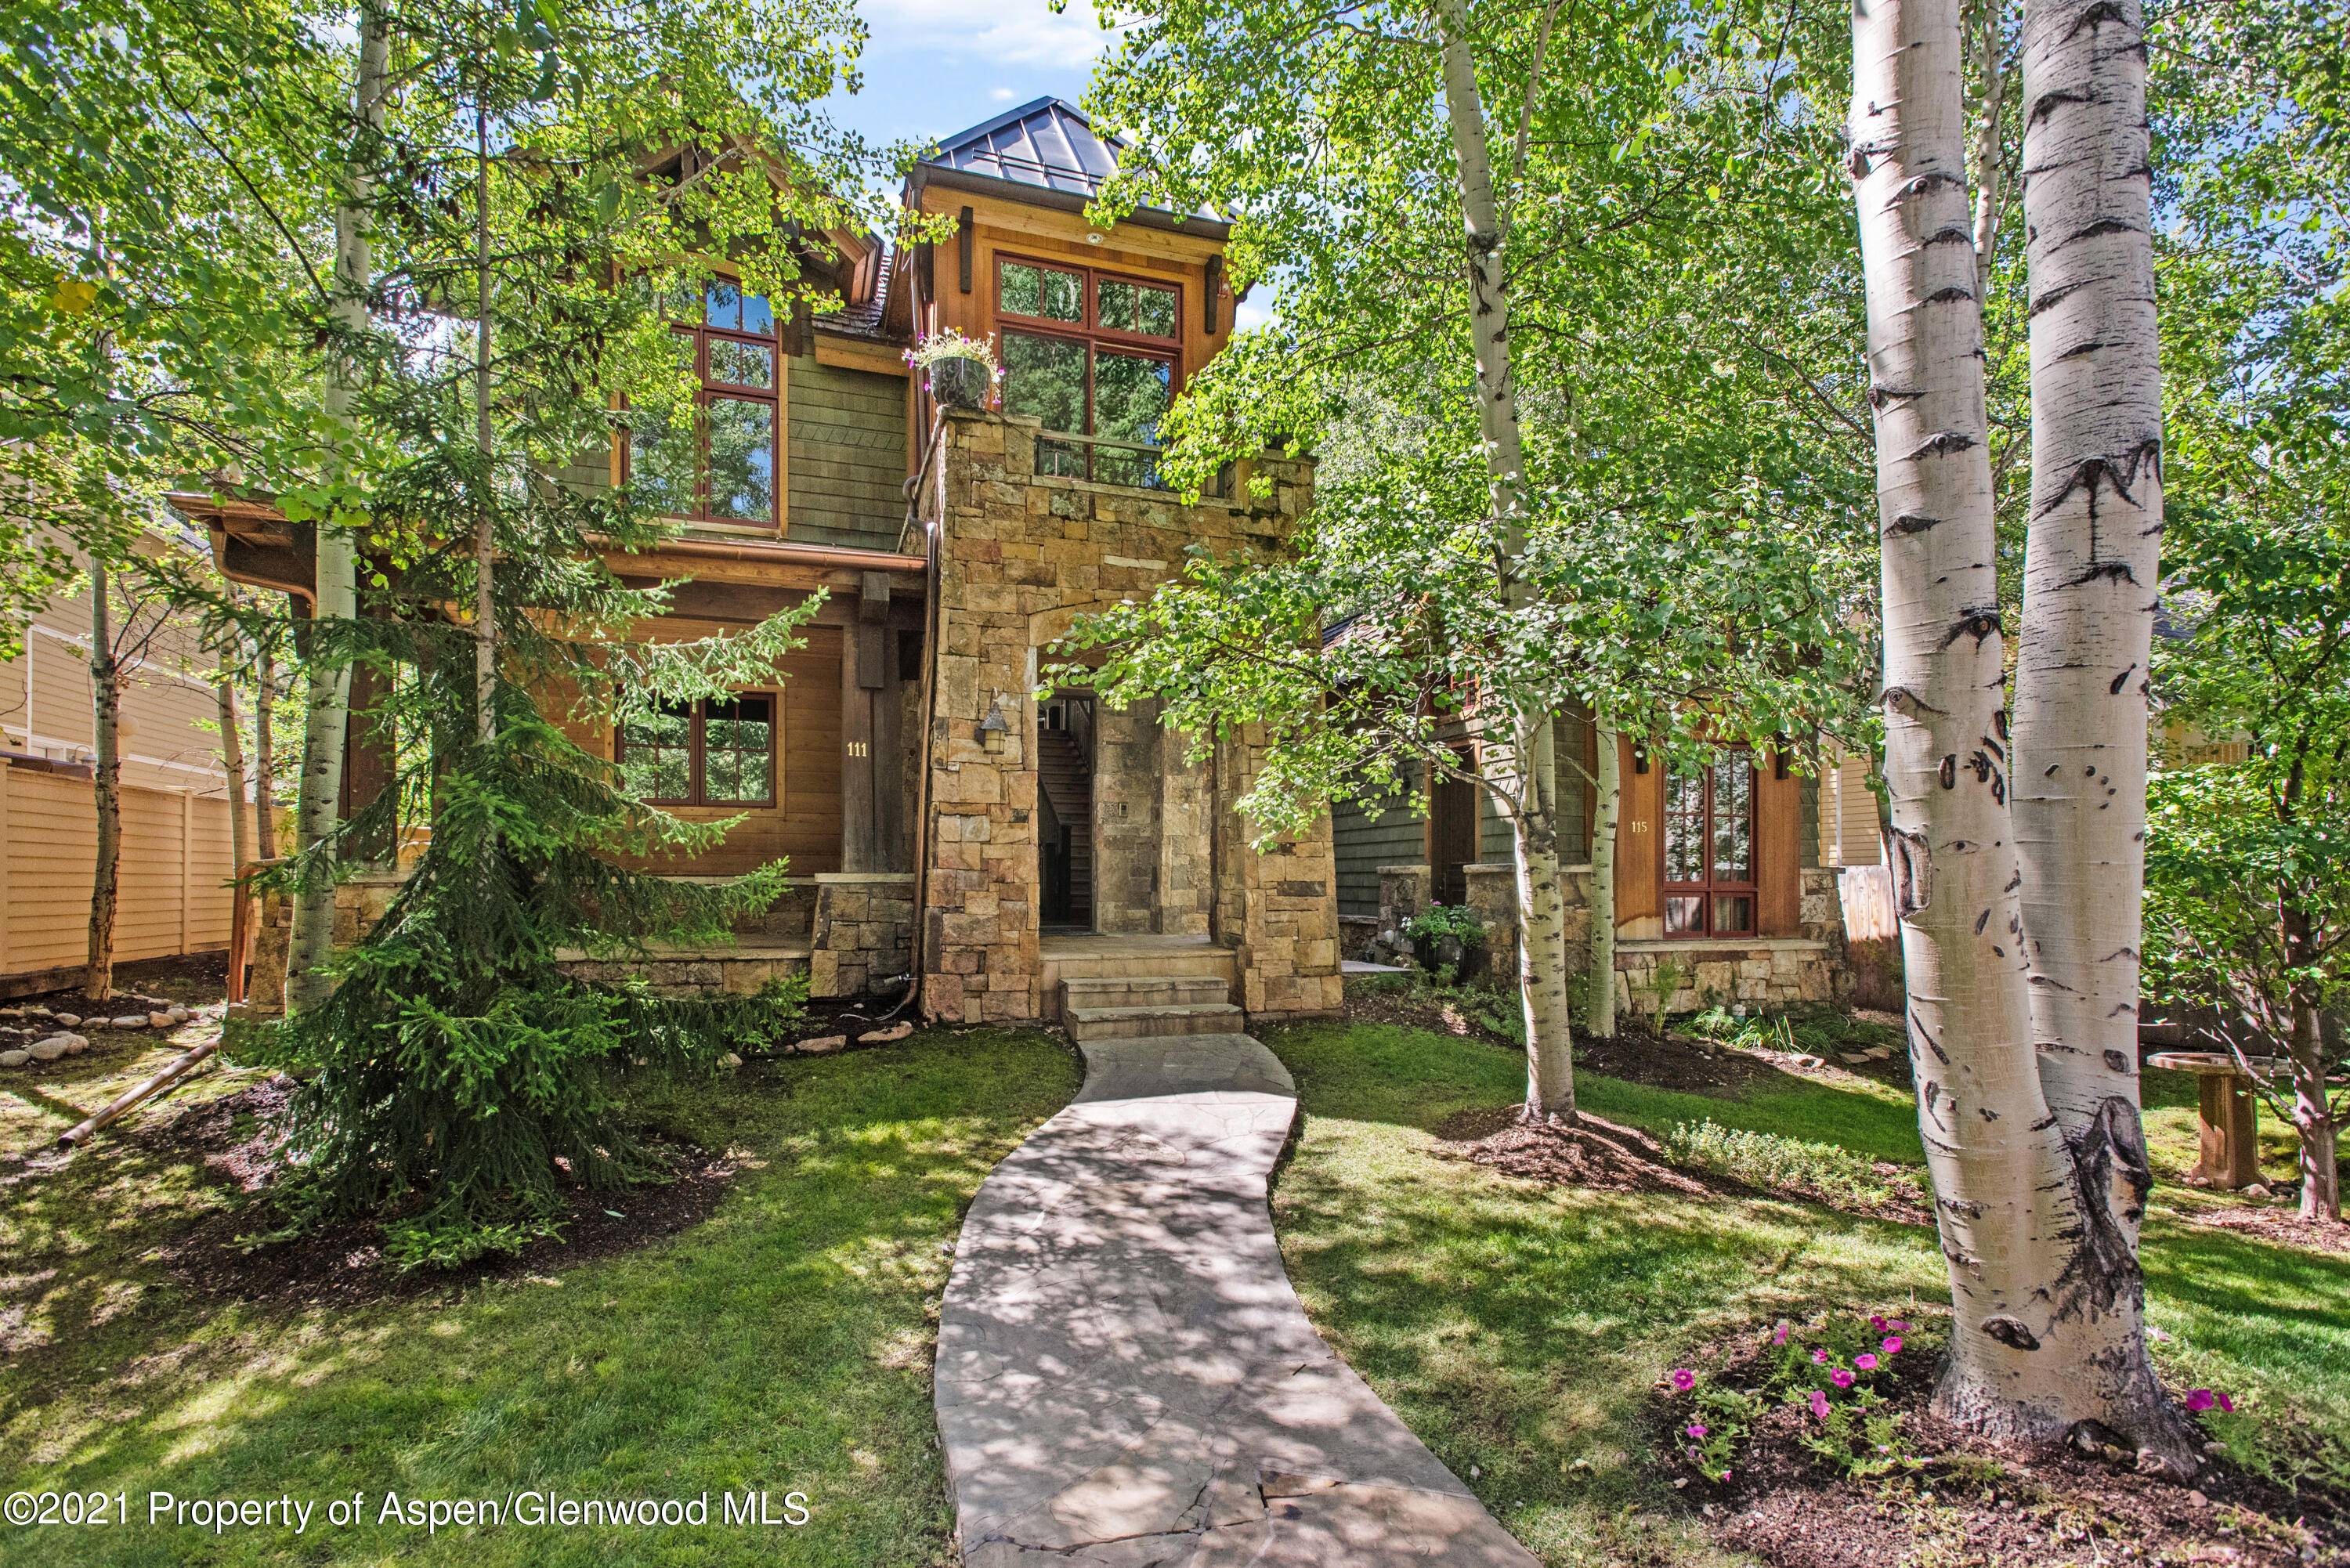 Classically appointed mountain home in Aspen's quaint West End.